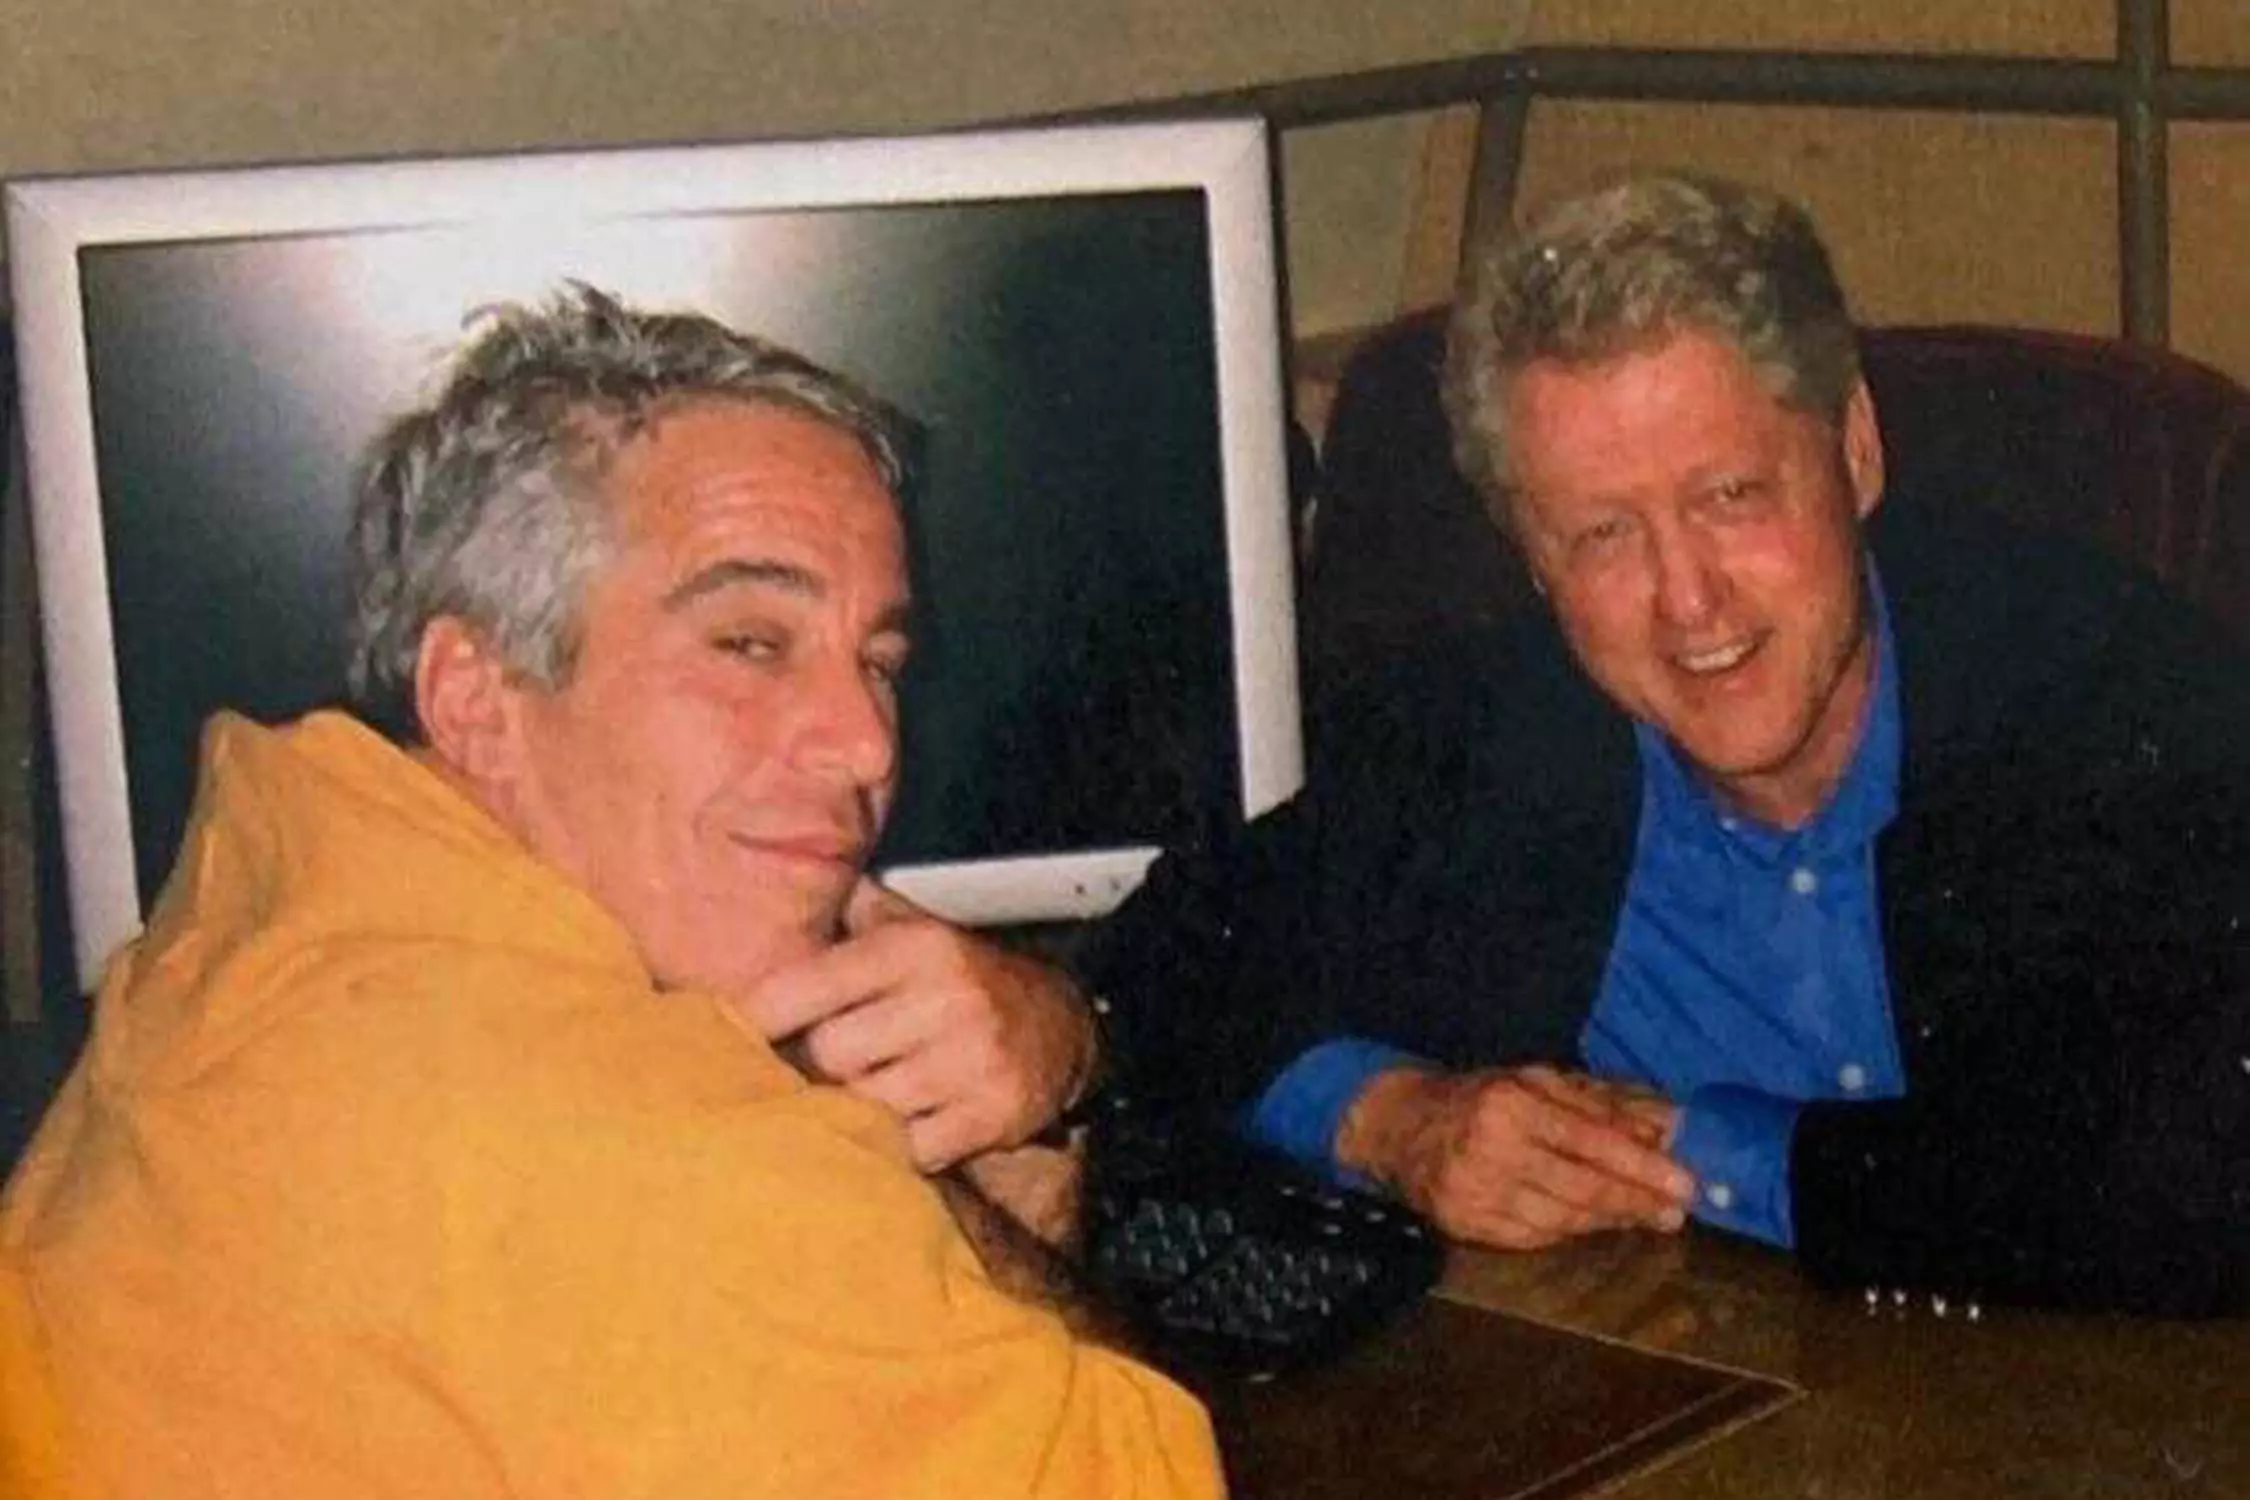 Did Bill Clinton Visit Epstein's Private Island a96019d65b234fe0a886cf307cd75585/Untitled.png